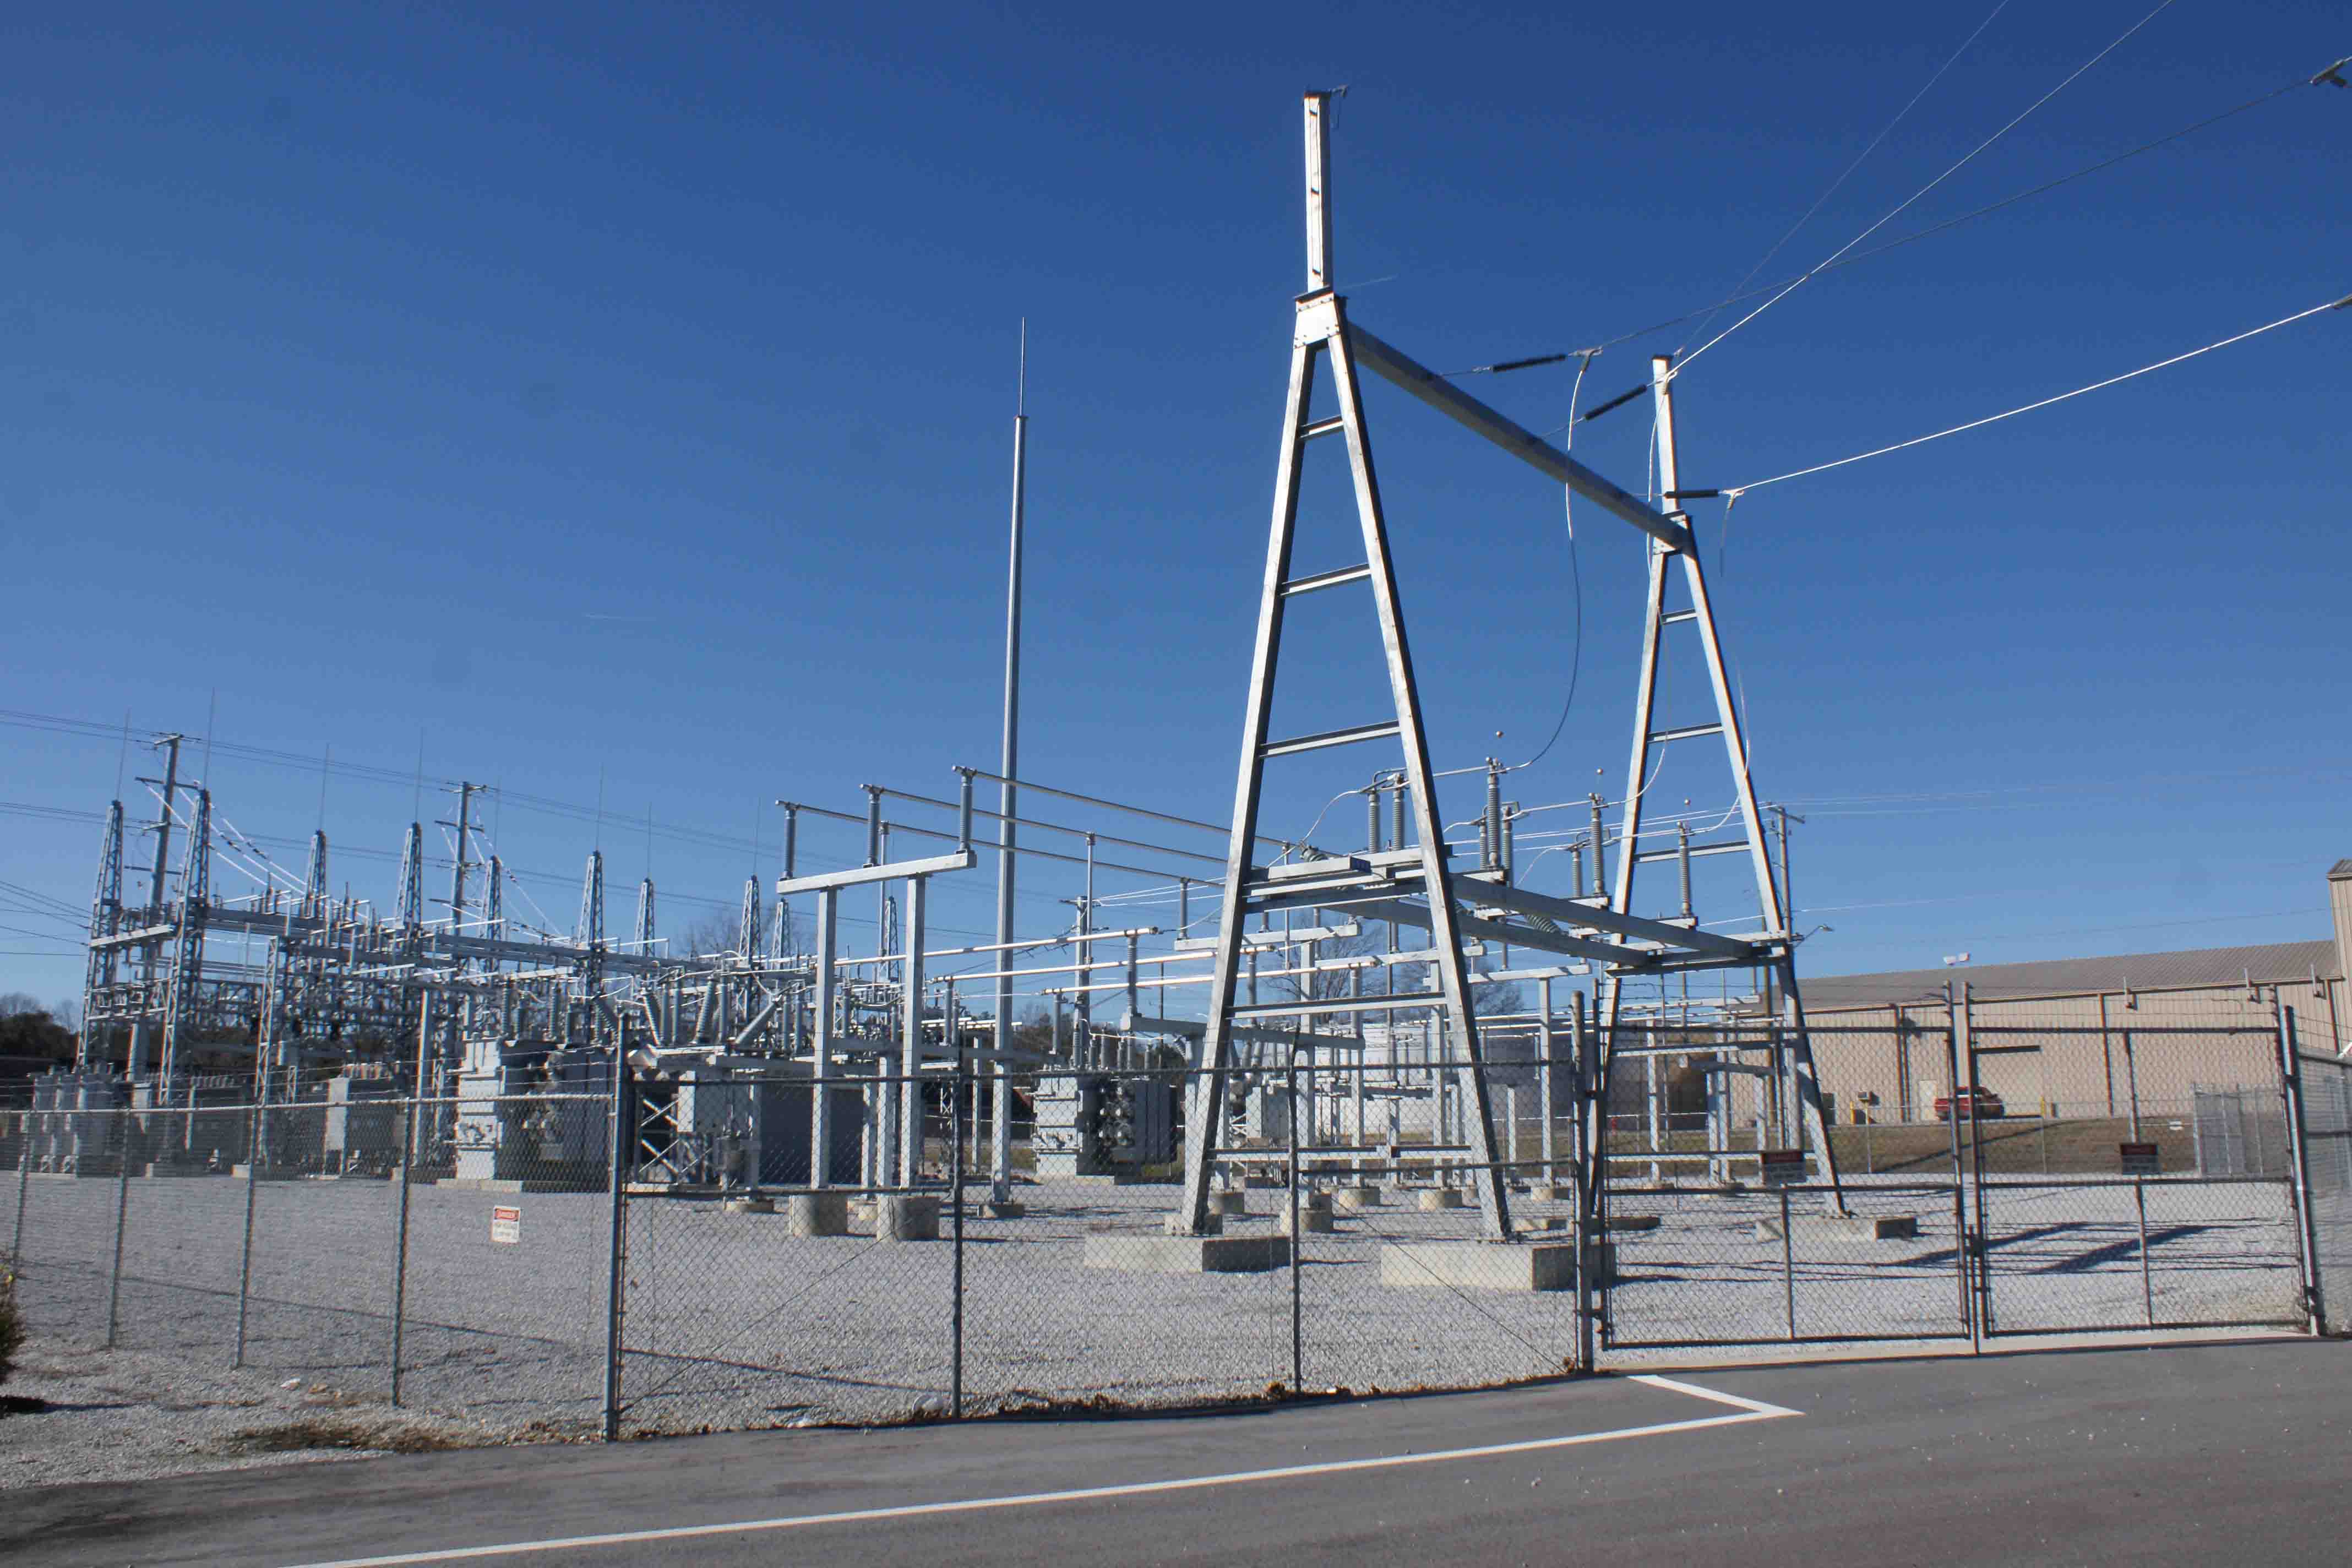 City of Newberry's new electrical substation